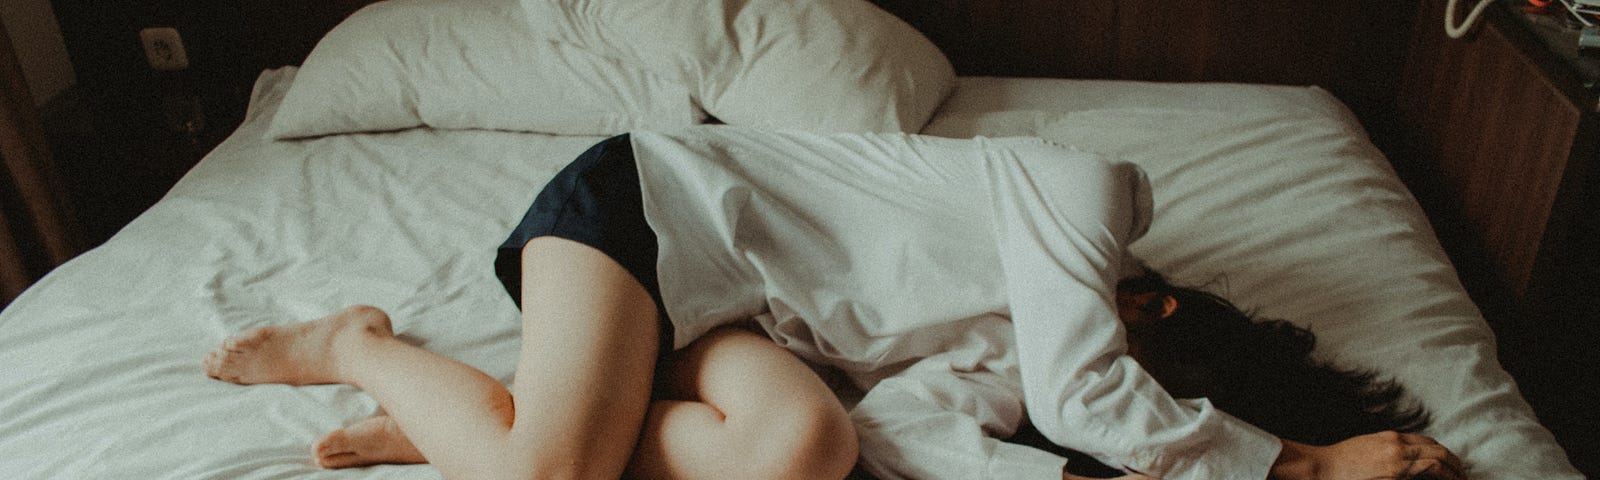 Woman curled up on the bed with her arms over her face